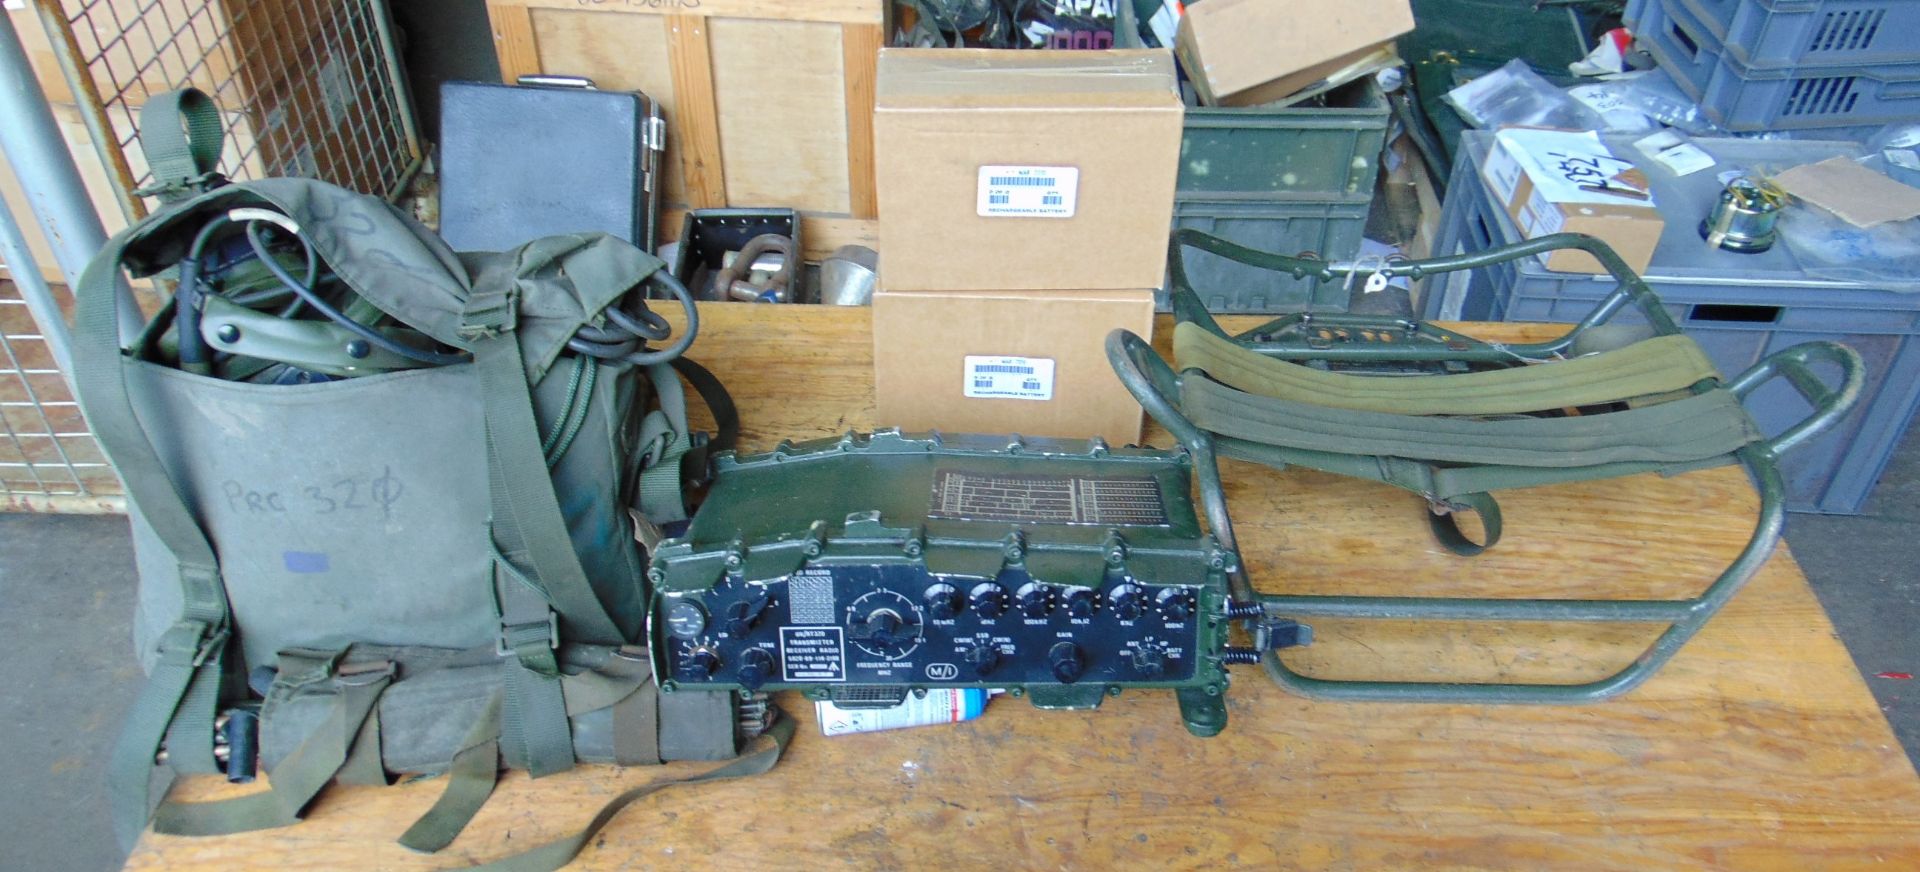 Clansman UK/RT 320 Transmitter Receiver HF c/w Kit & Two Spare Batteries as shown - Image 2 of 5